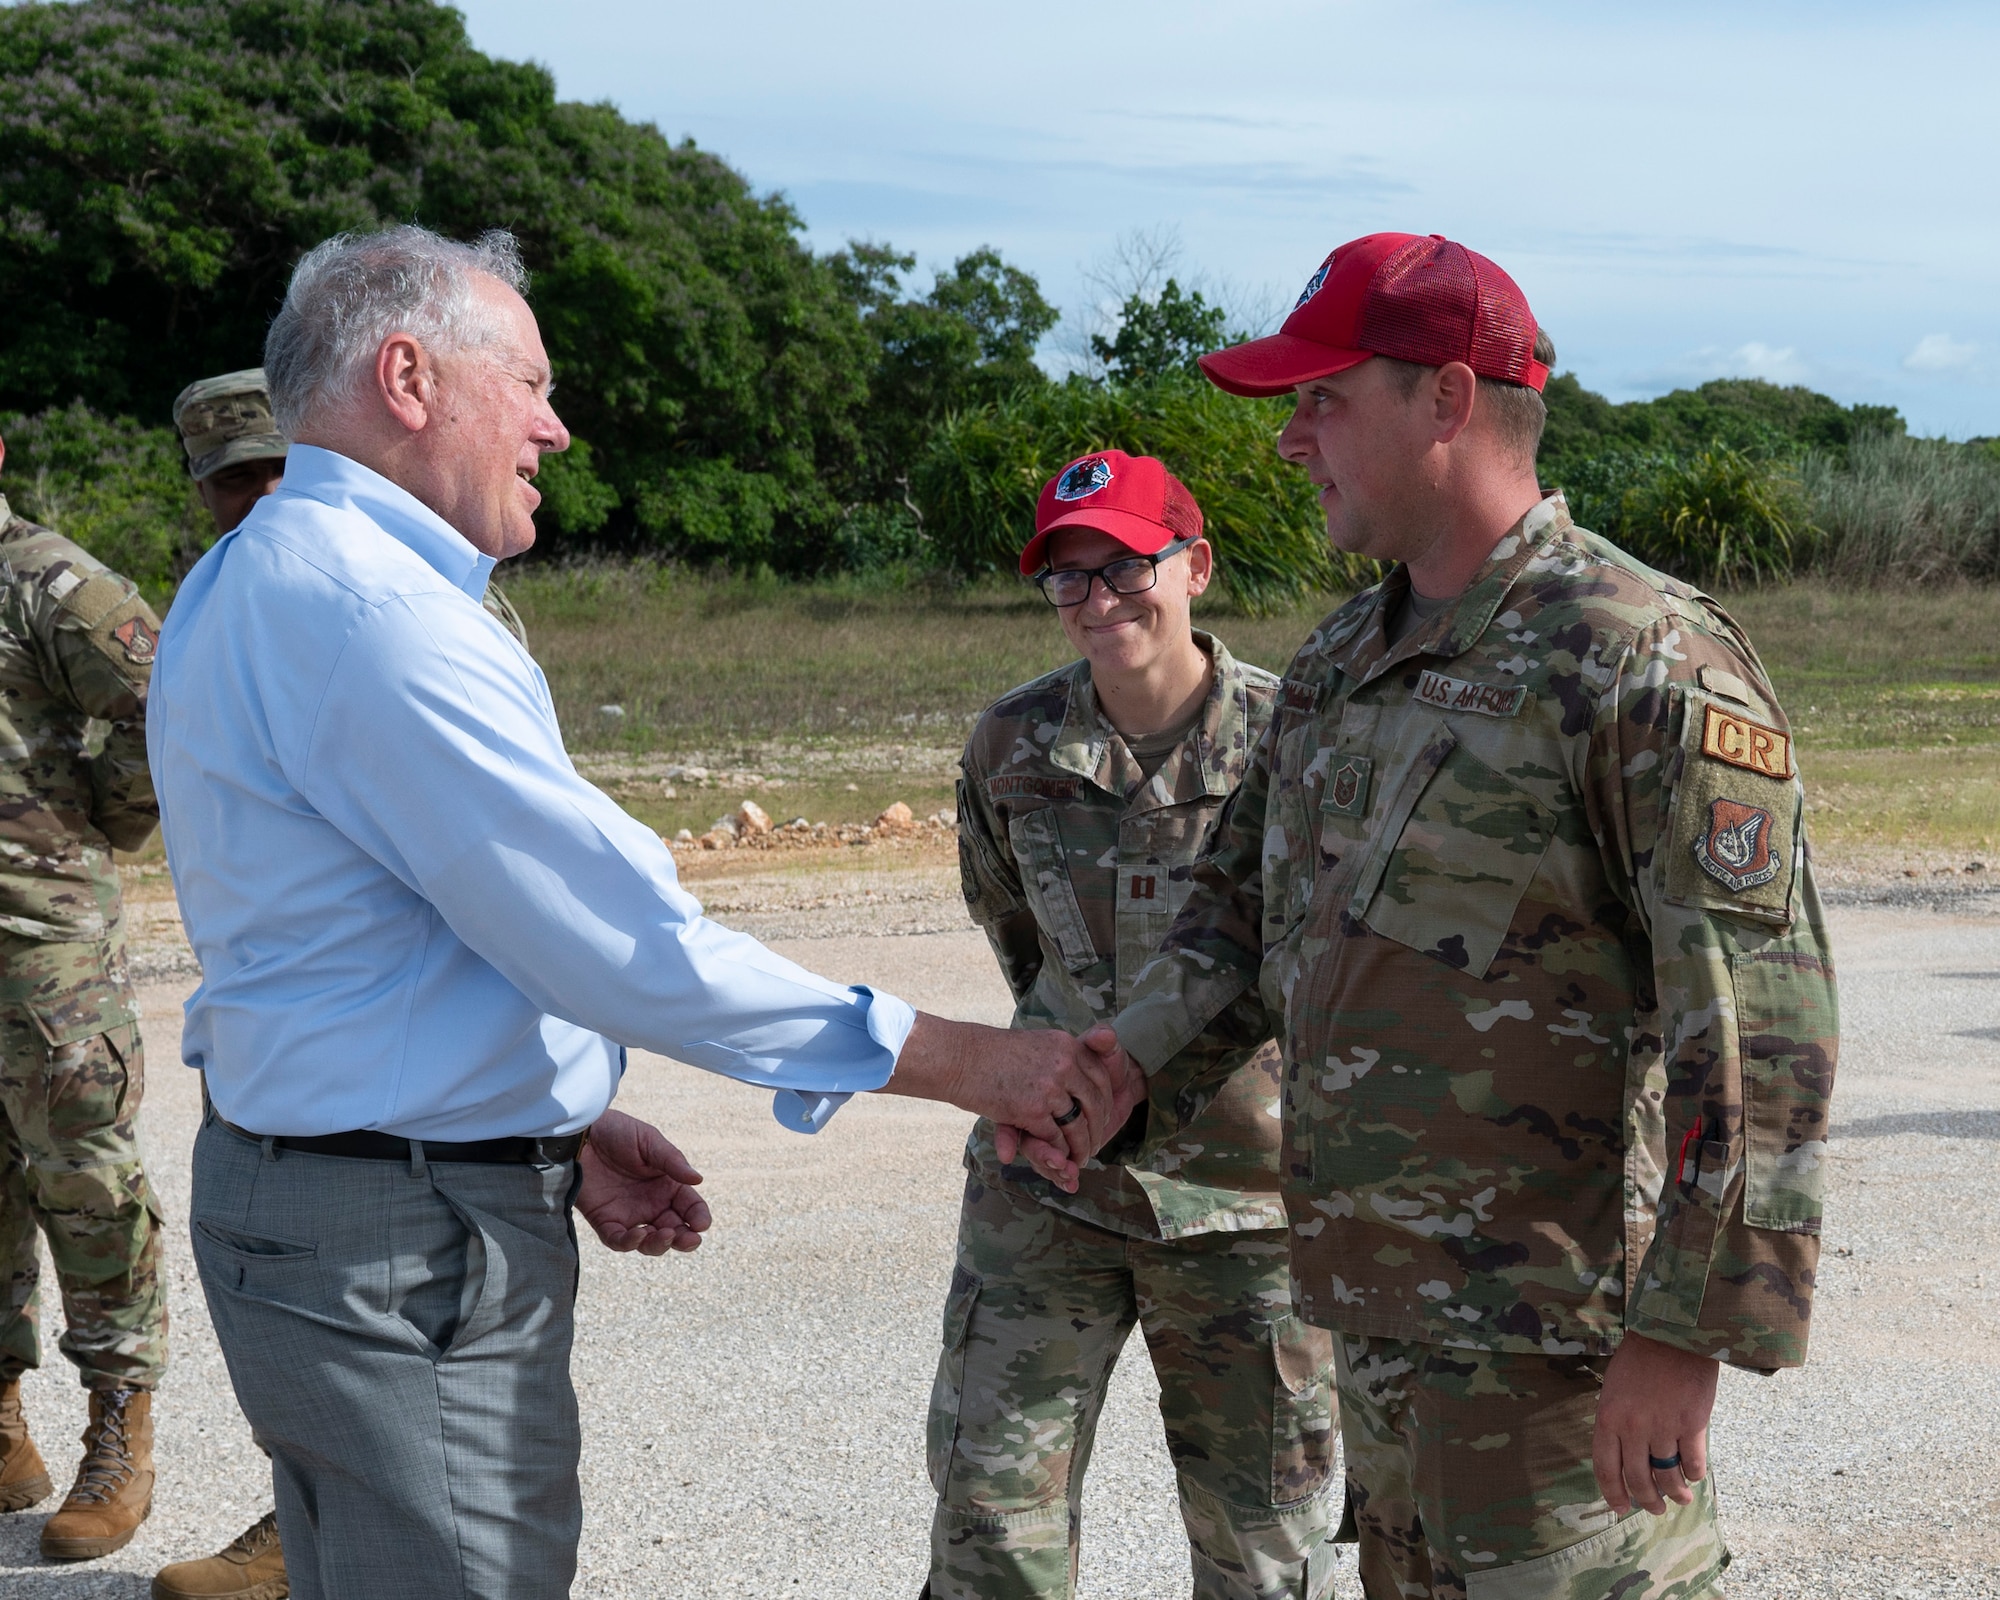 Secretary of the Air Force Frank Kendall coins Master Sgt. Ryan Maxwell, 554th RED HORSE materiel management section chief, during his visit to Andersen Air Force Base, Guam, Aug. 19, 2022.